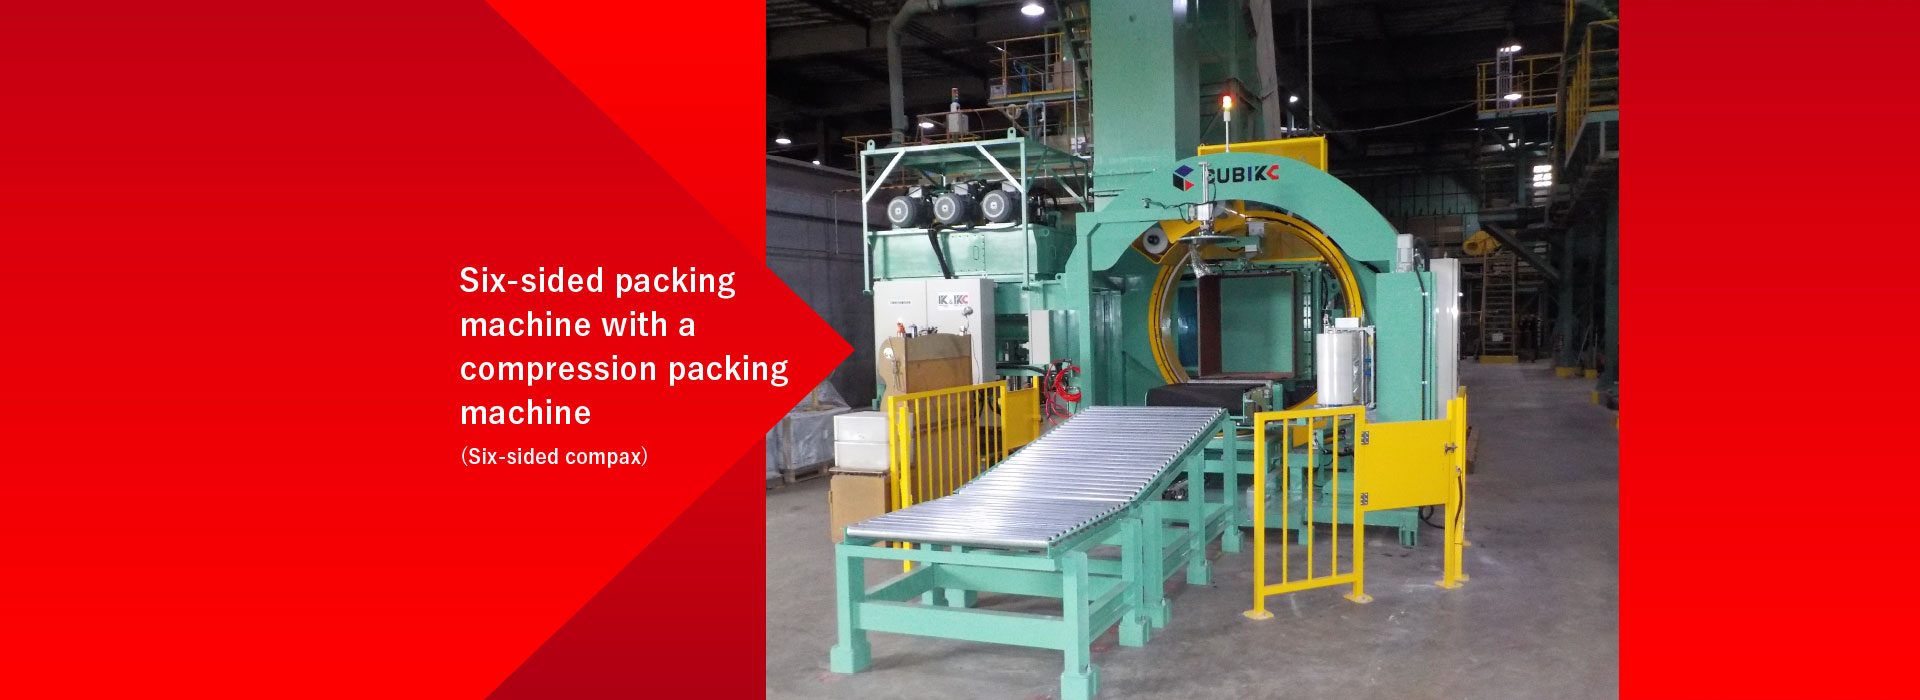 Six-sided packing machine with a compression packing machine